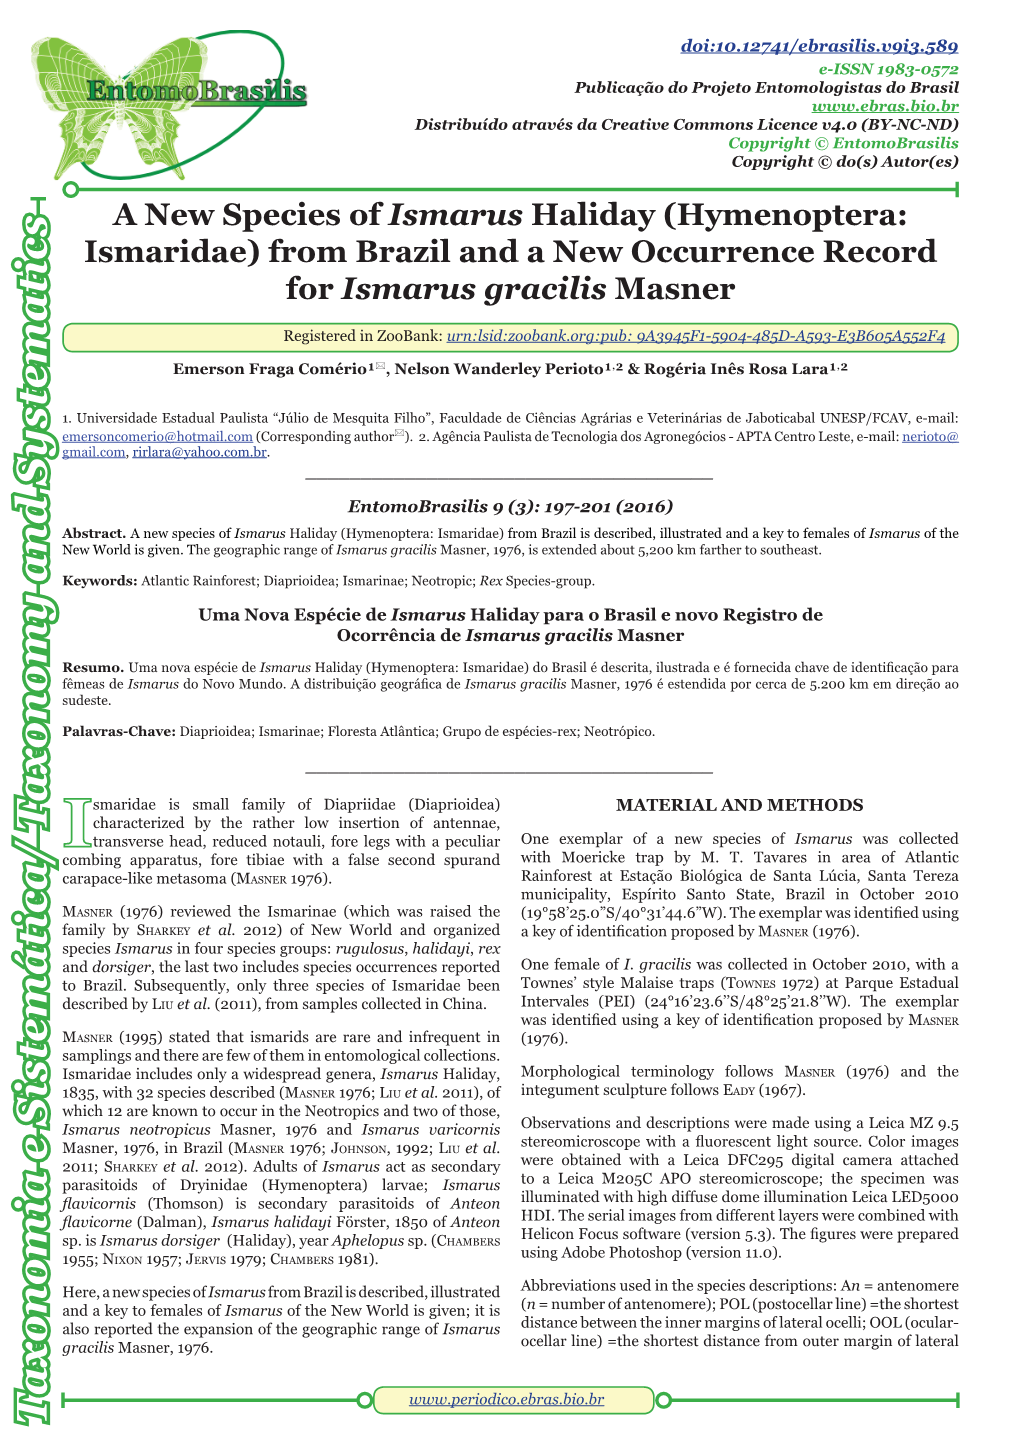 (Hymenoptera: Ismaridae) from Brazil and a New Occurrence Record for Ismarus Gracilis Masner